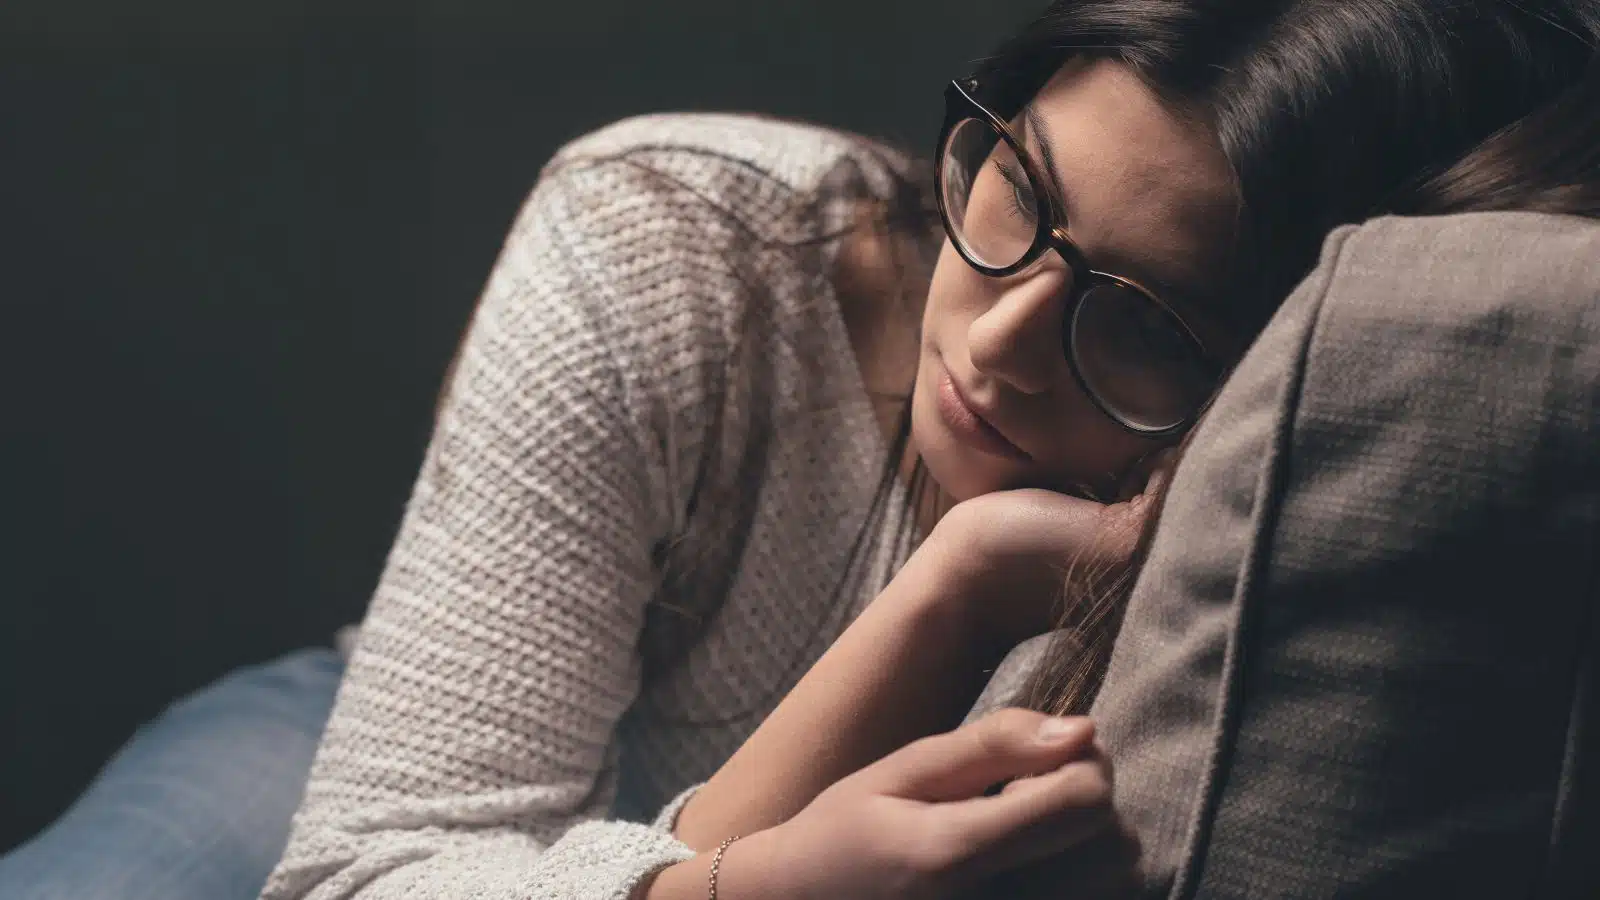 “I'm Sick and Tired Of Being Sad” 10 Nearly Impossible Things To Have But We Keep On Trying